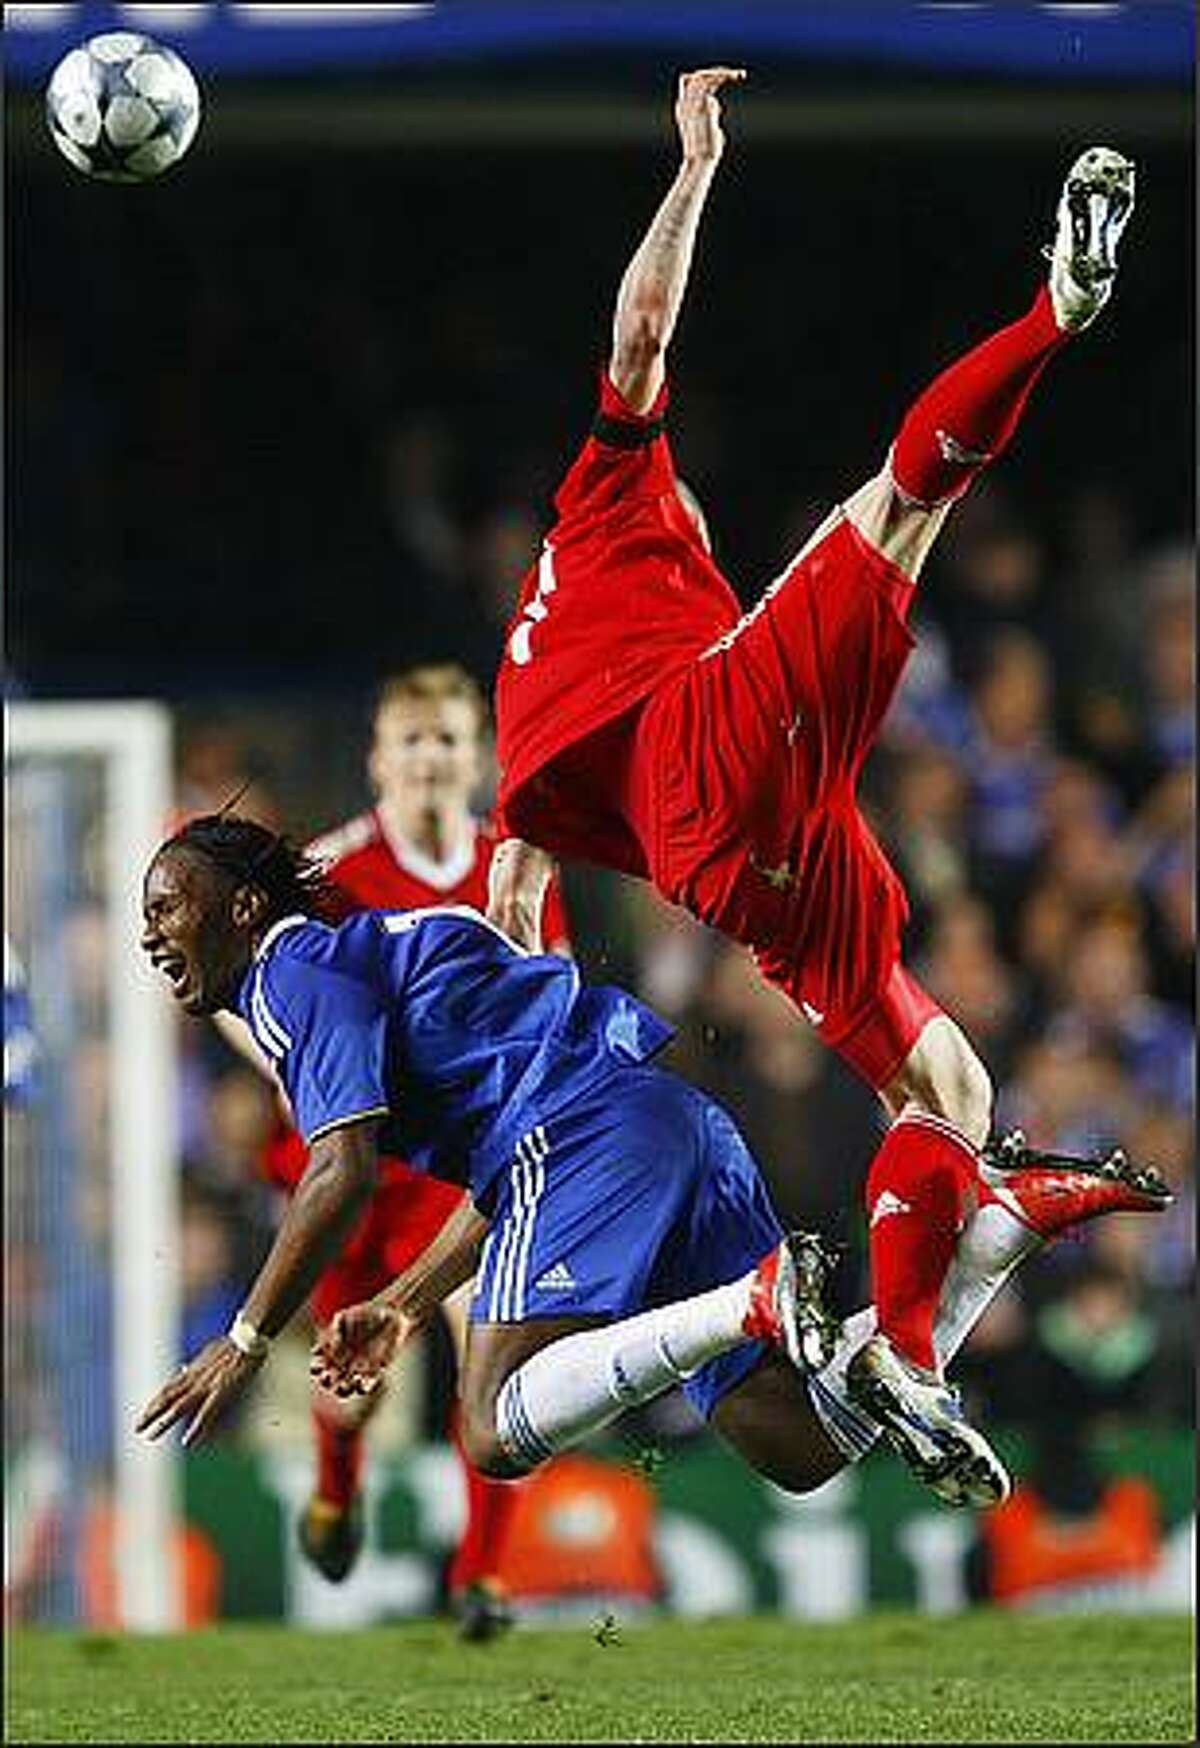 Chelsea's Didier Drogba, left, is fouled by Liverpool's Martin Skrtel during their Champions League quarter-final second-leg soccer match at Stamford Bridge in London on April 14.